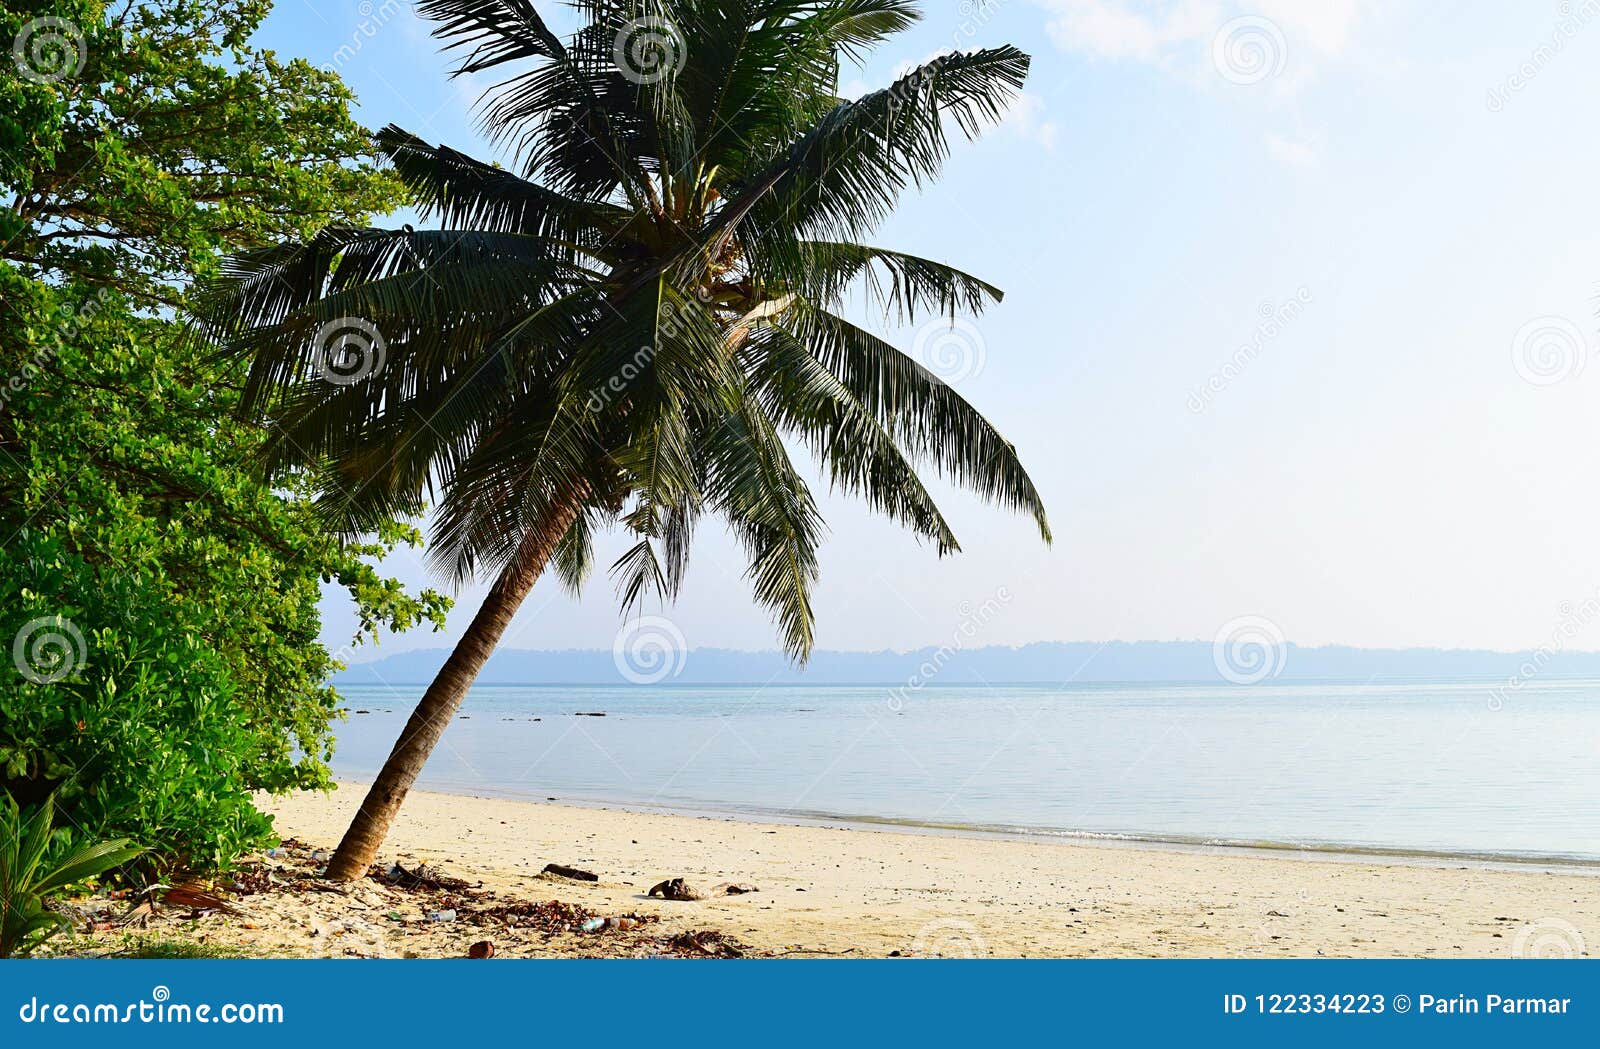 Download Relax and enjoy the view at a serene tropical beach Wallpaper   Wallpaperscom